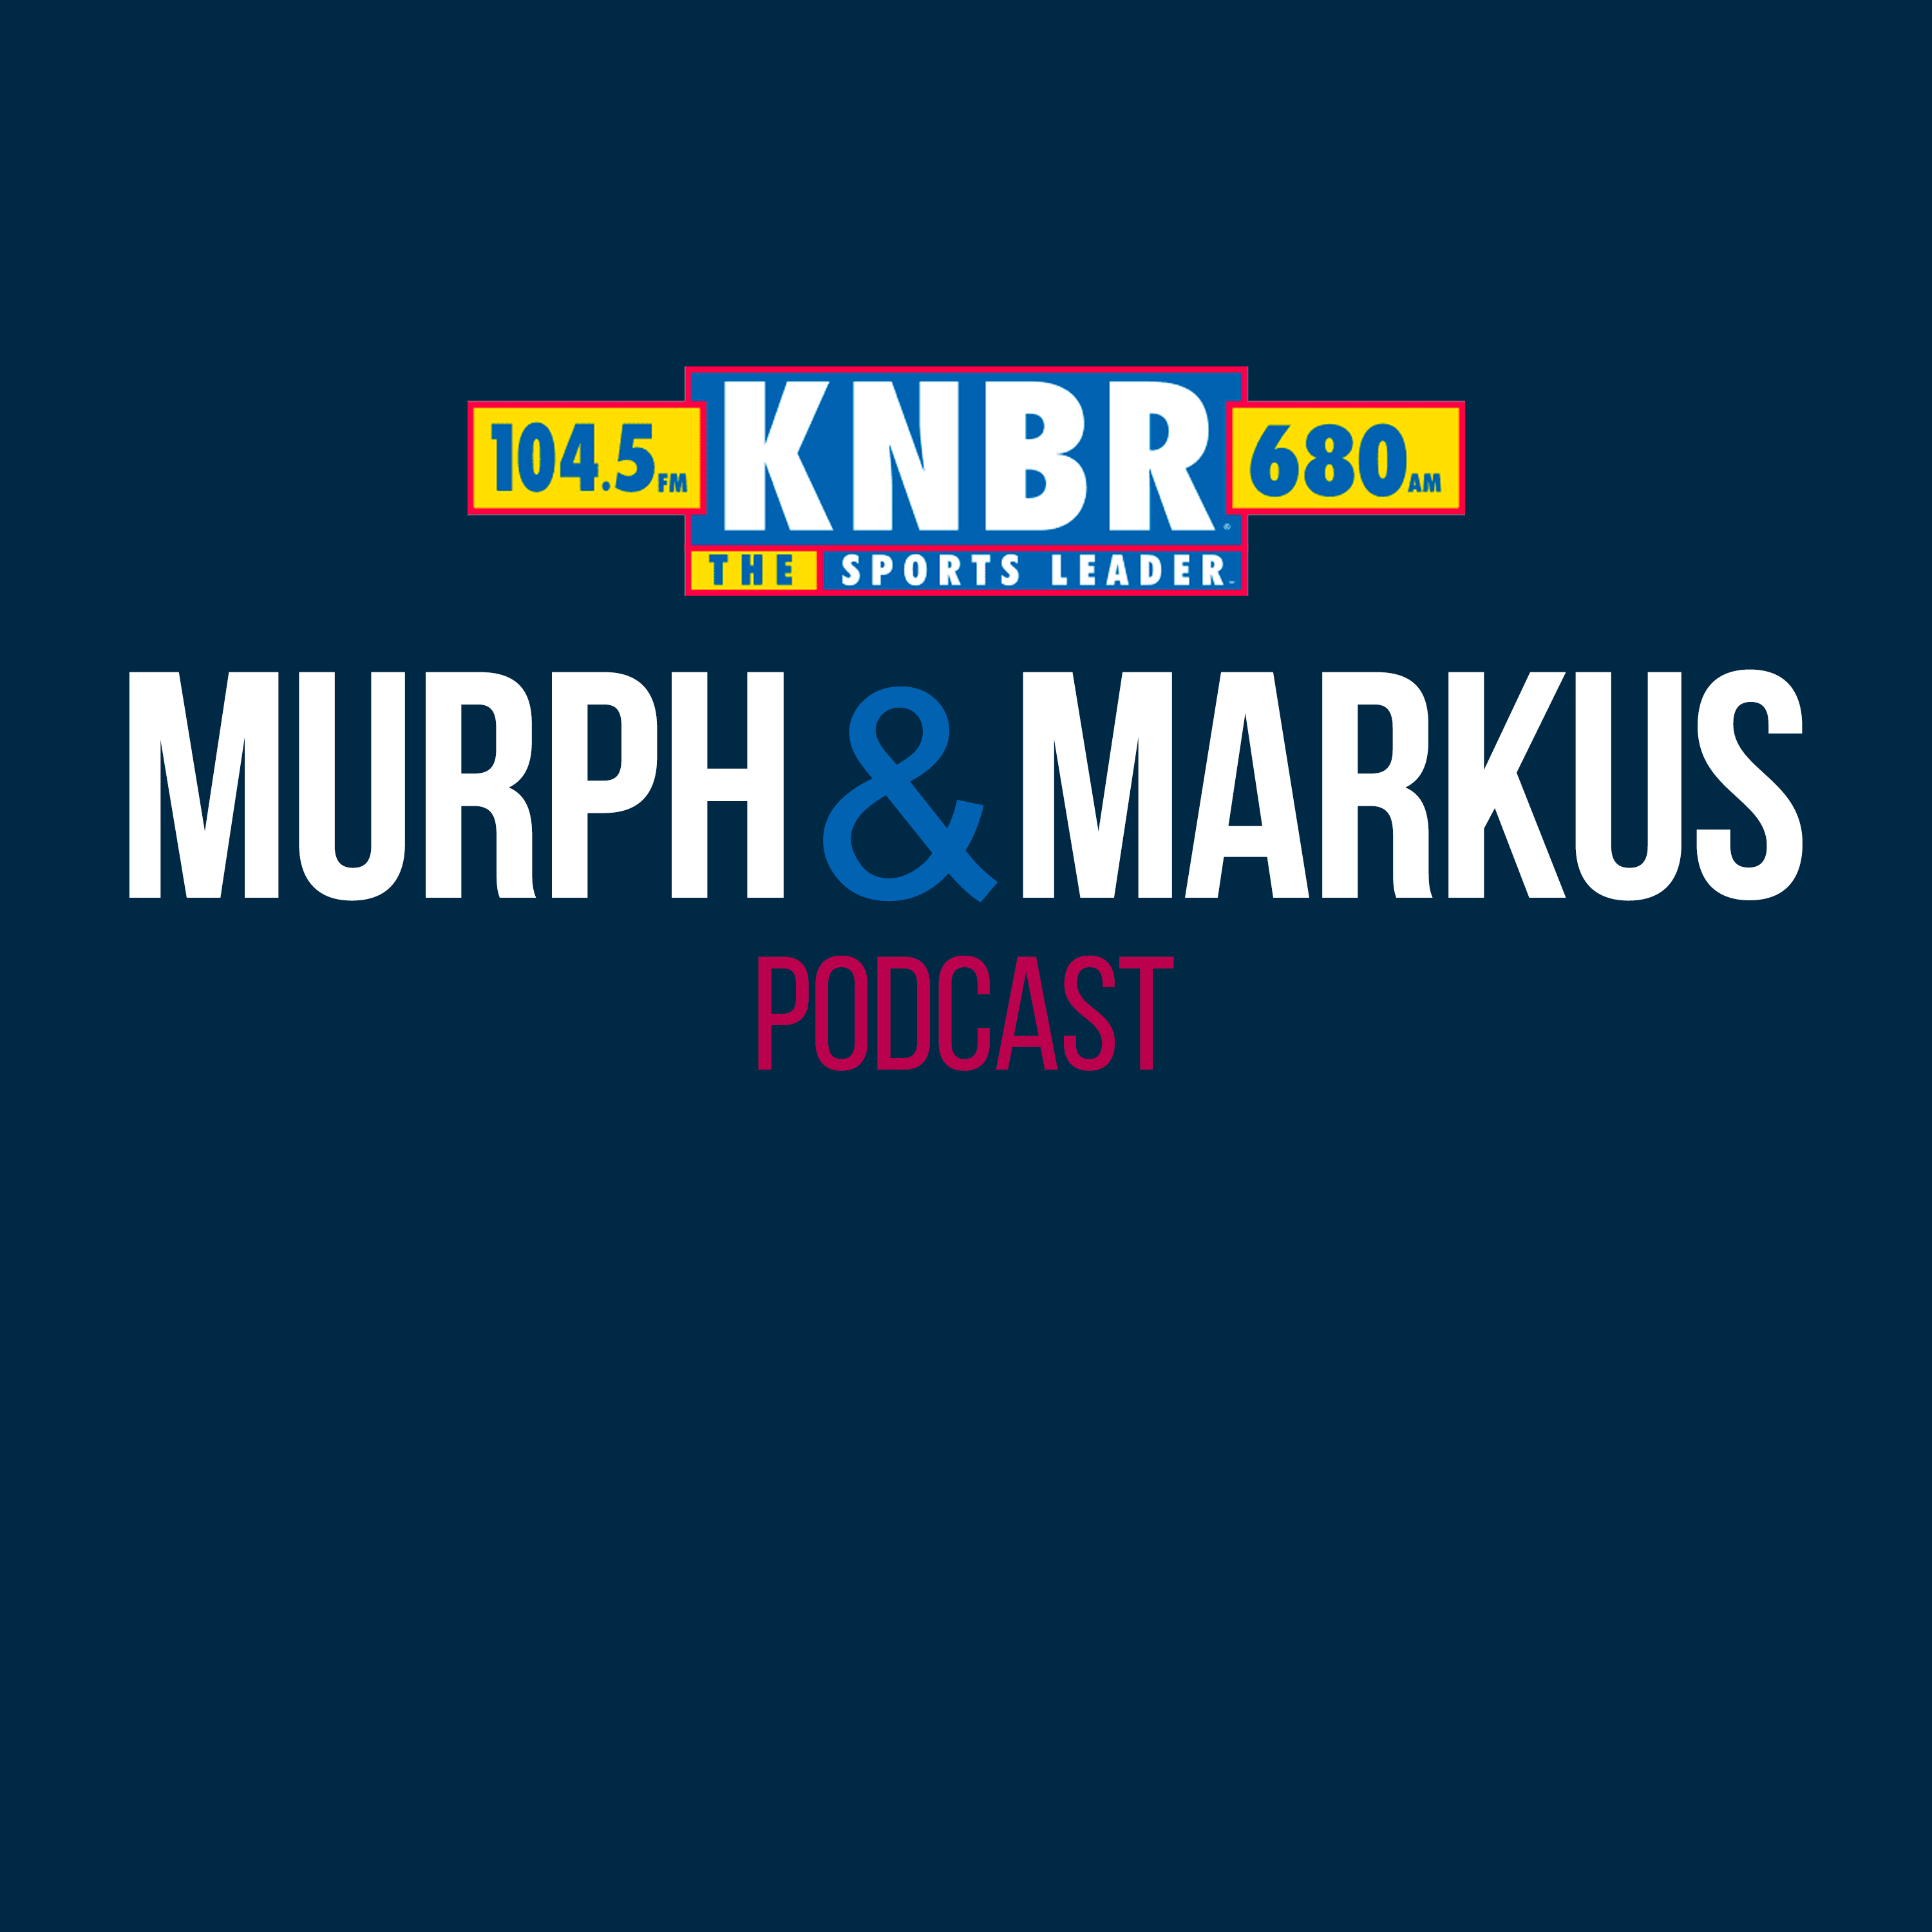 4-22 George Kontos talks to Murph and Markus about the "foul tip" call vs the D'Backs and what happened in the series.